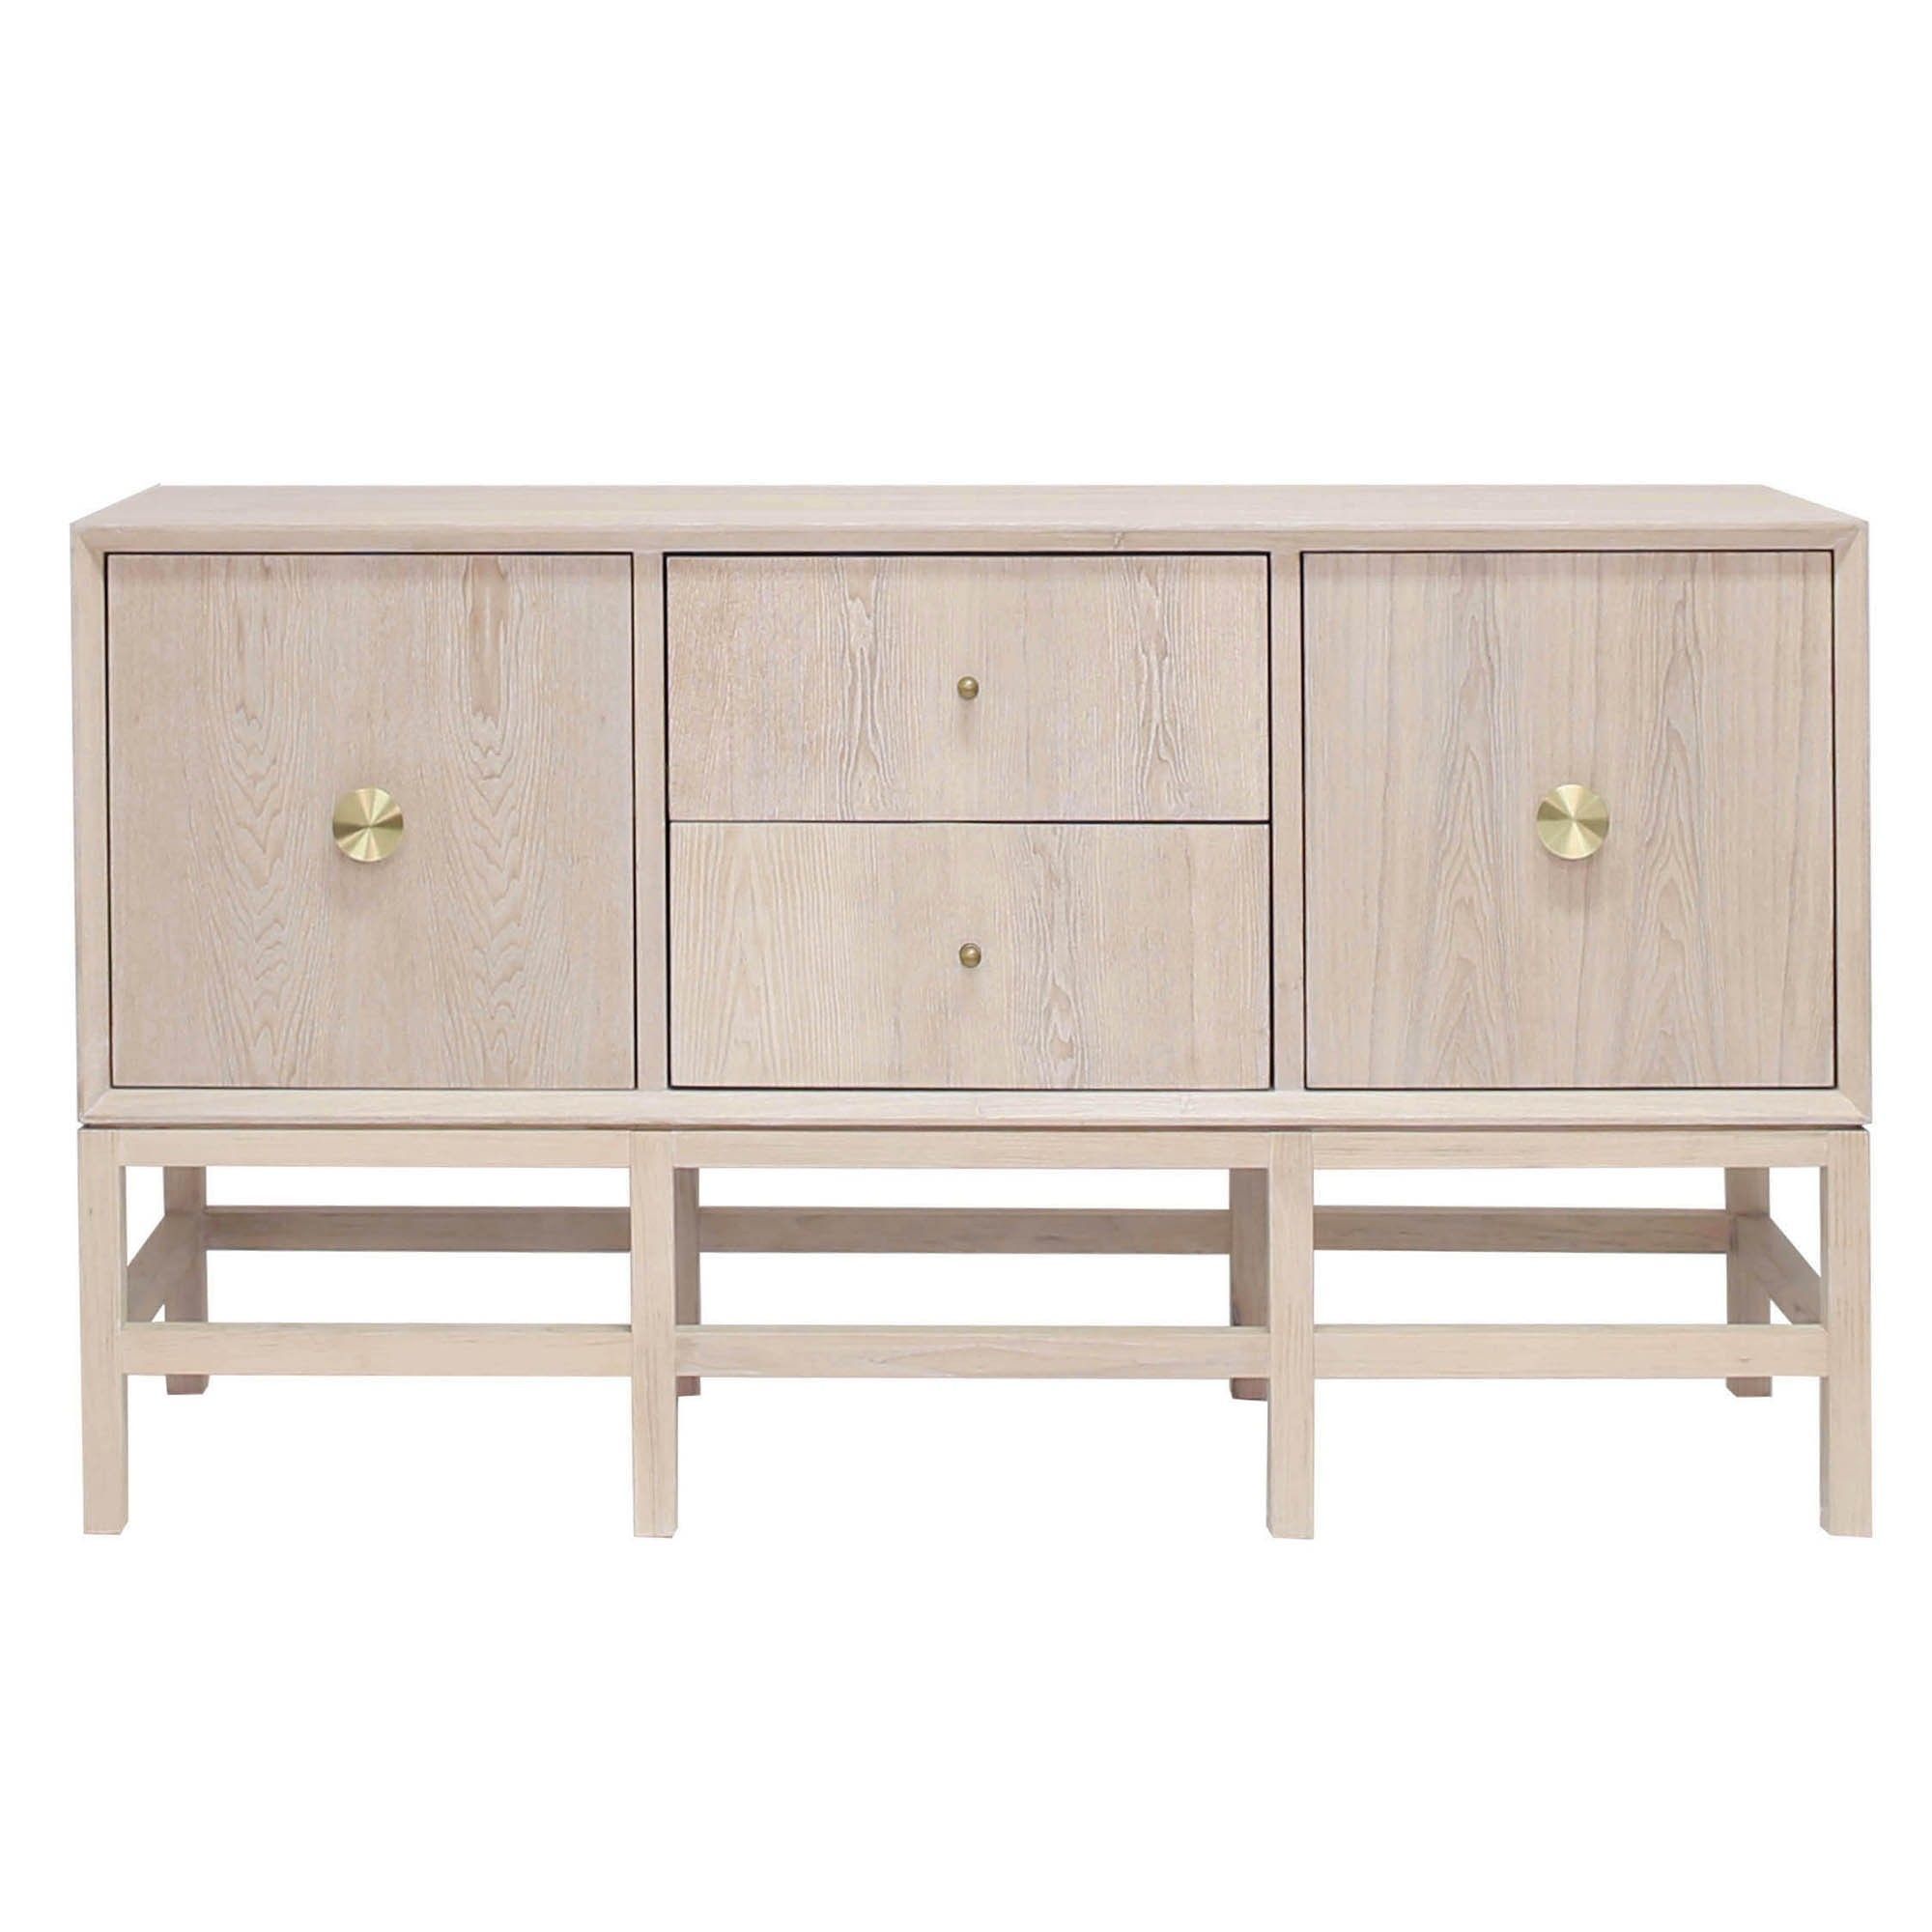 Rosecliff Heights Drummond 3 Drawer Sideboard | Products For Most Current Drummond 3 Drawer Sideboards (Photo 8 of 20)